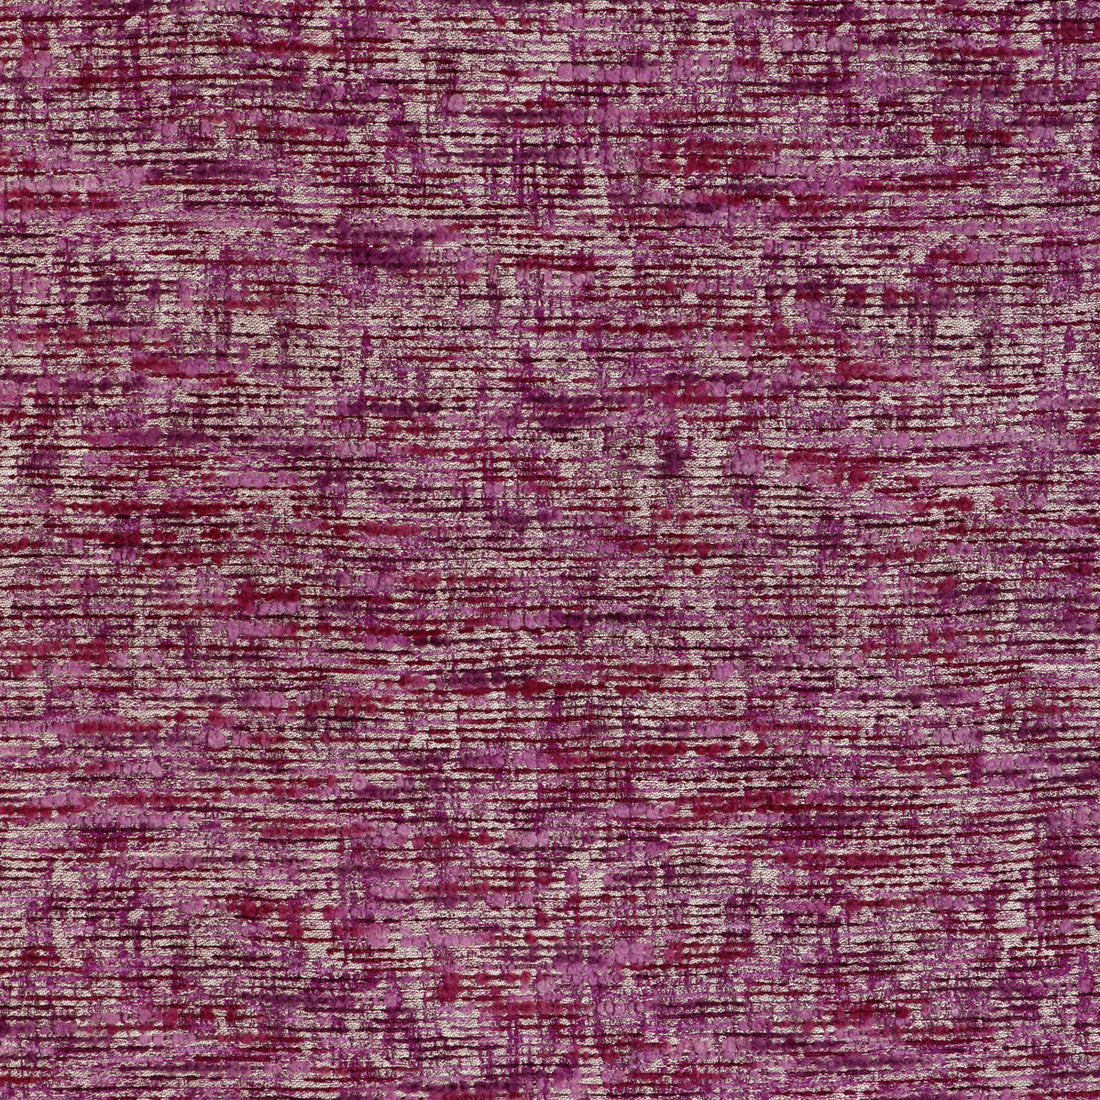 Pierre Texture fabric in amethyst color - pattern 8023143.910.0 - by Brunschwig &amp; Fils in the Celeste collection